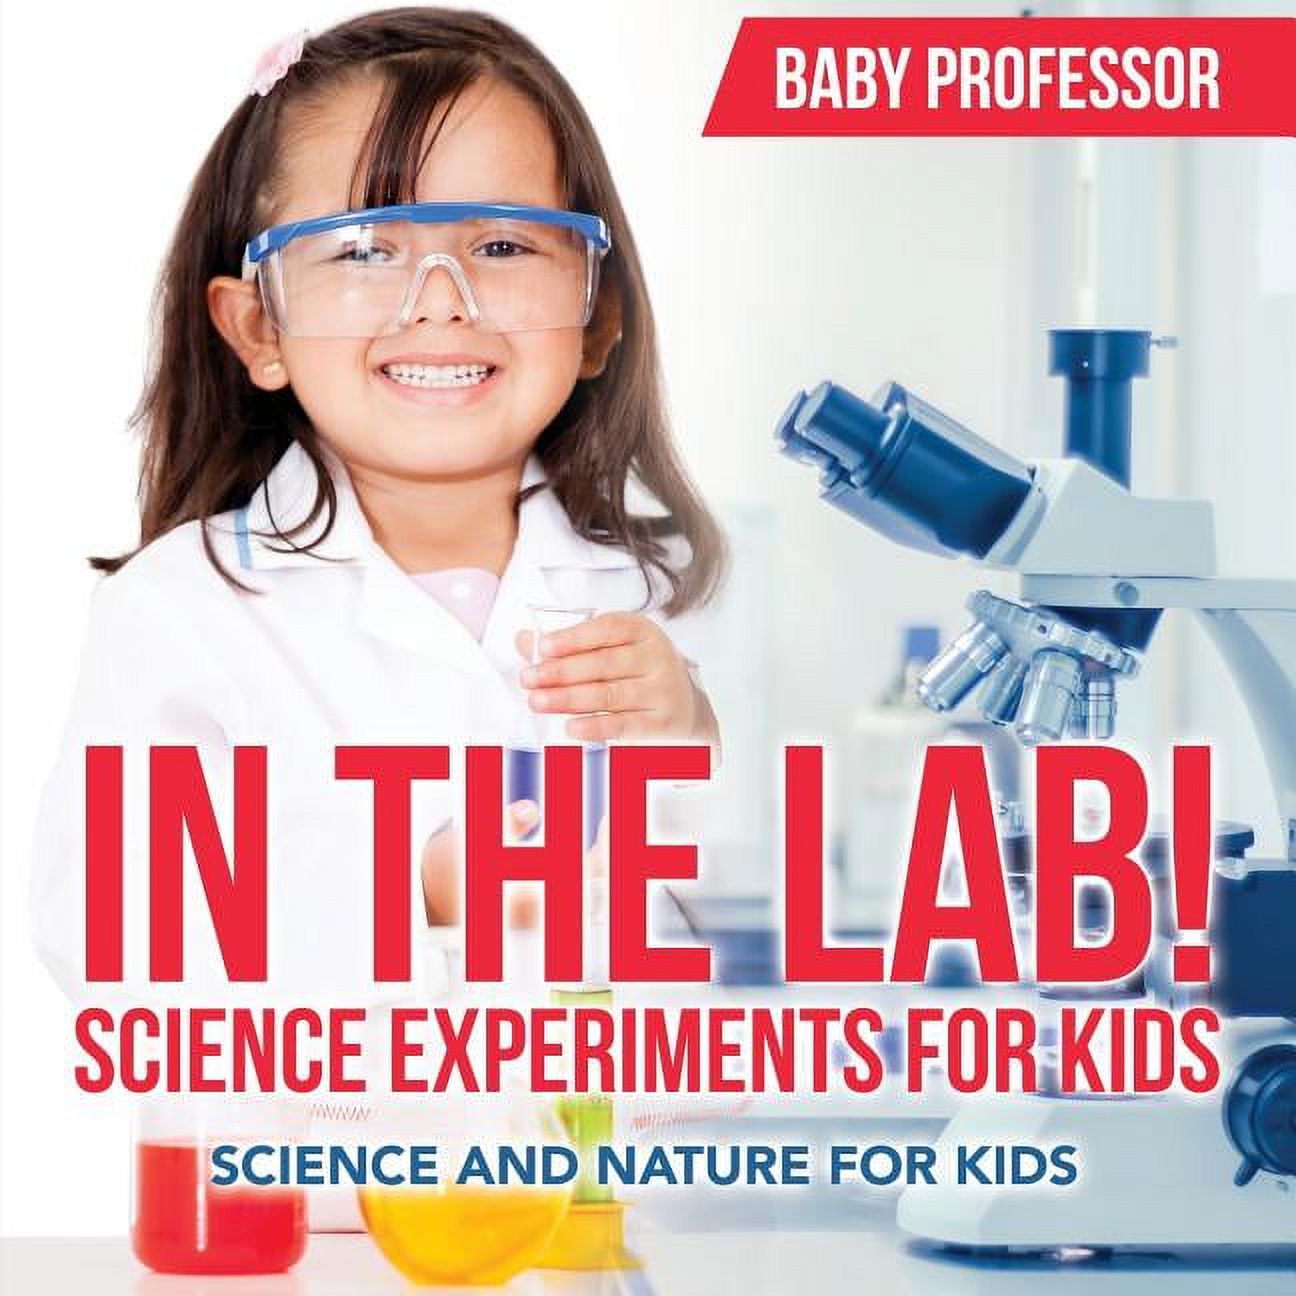 In The Lab! Science Experiments for Kids Science and Nature for Kids (Paperback) - image 1 of 1